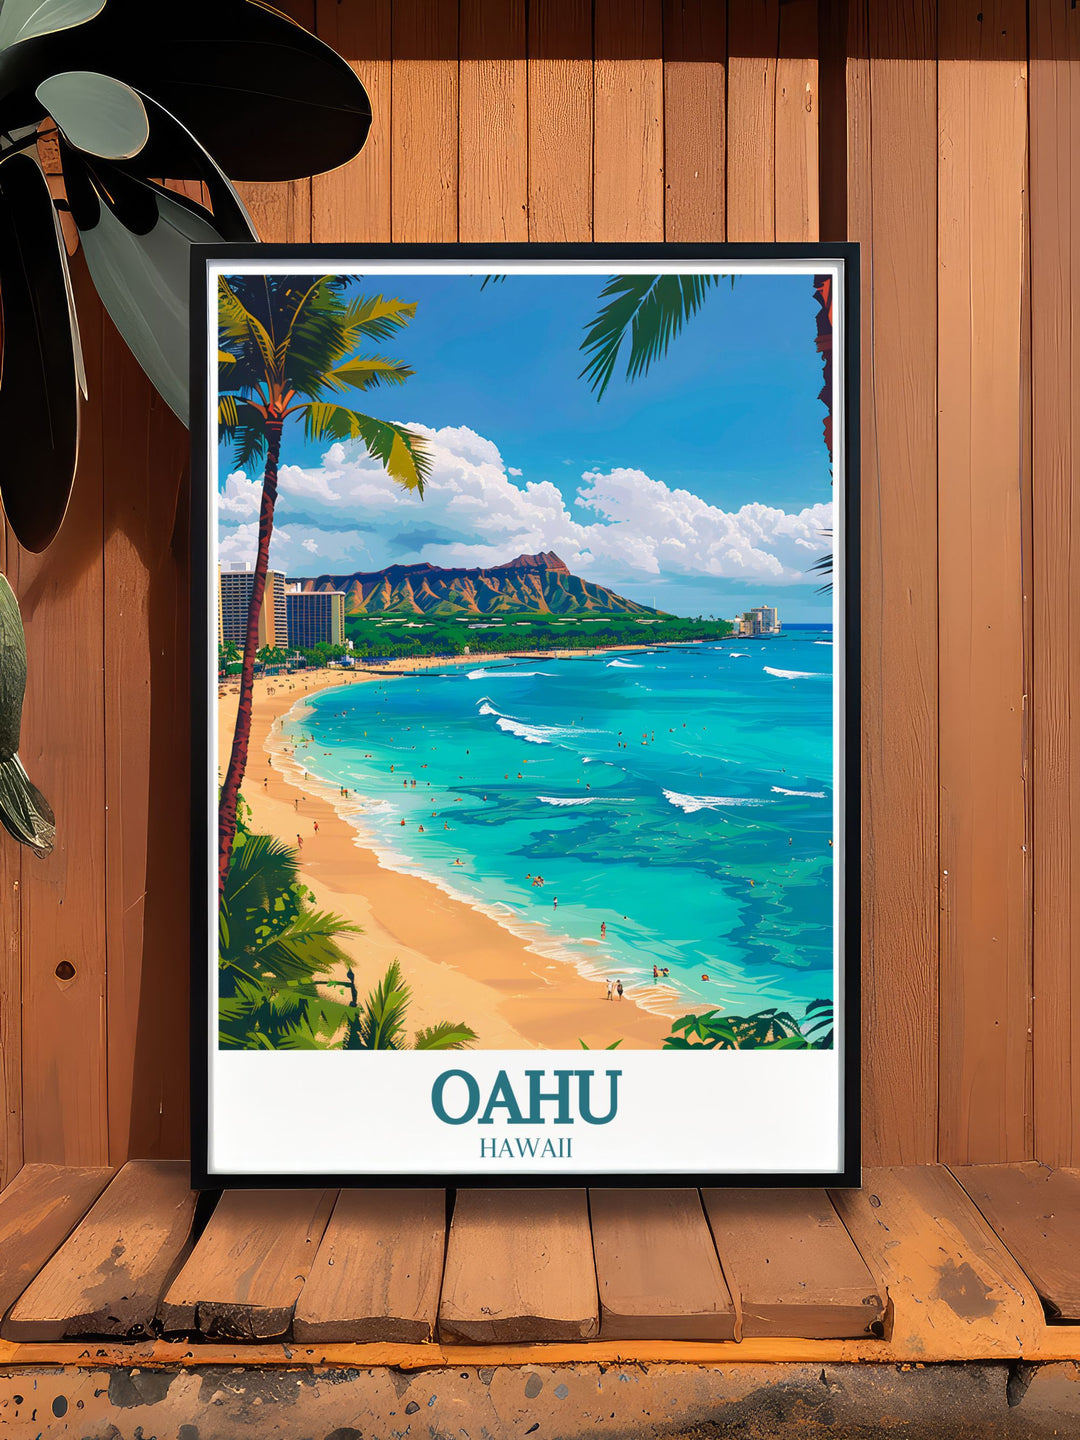 Enhance your living space with this exquisite Oahu art print of Waikiki Beach and Diamond Head Crater a wonderful representation of Hawaiis natural beauty.